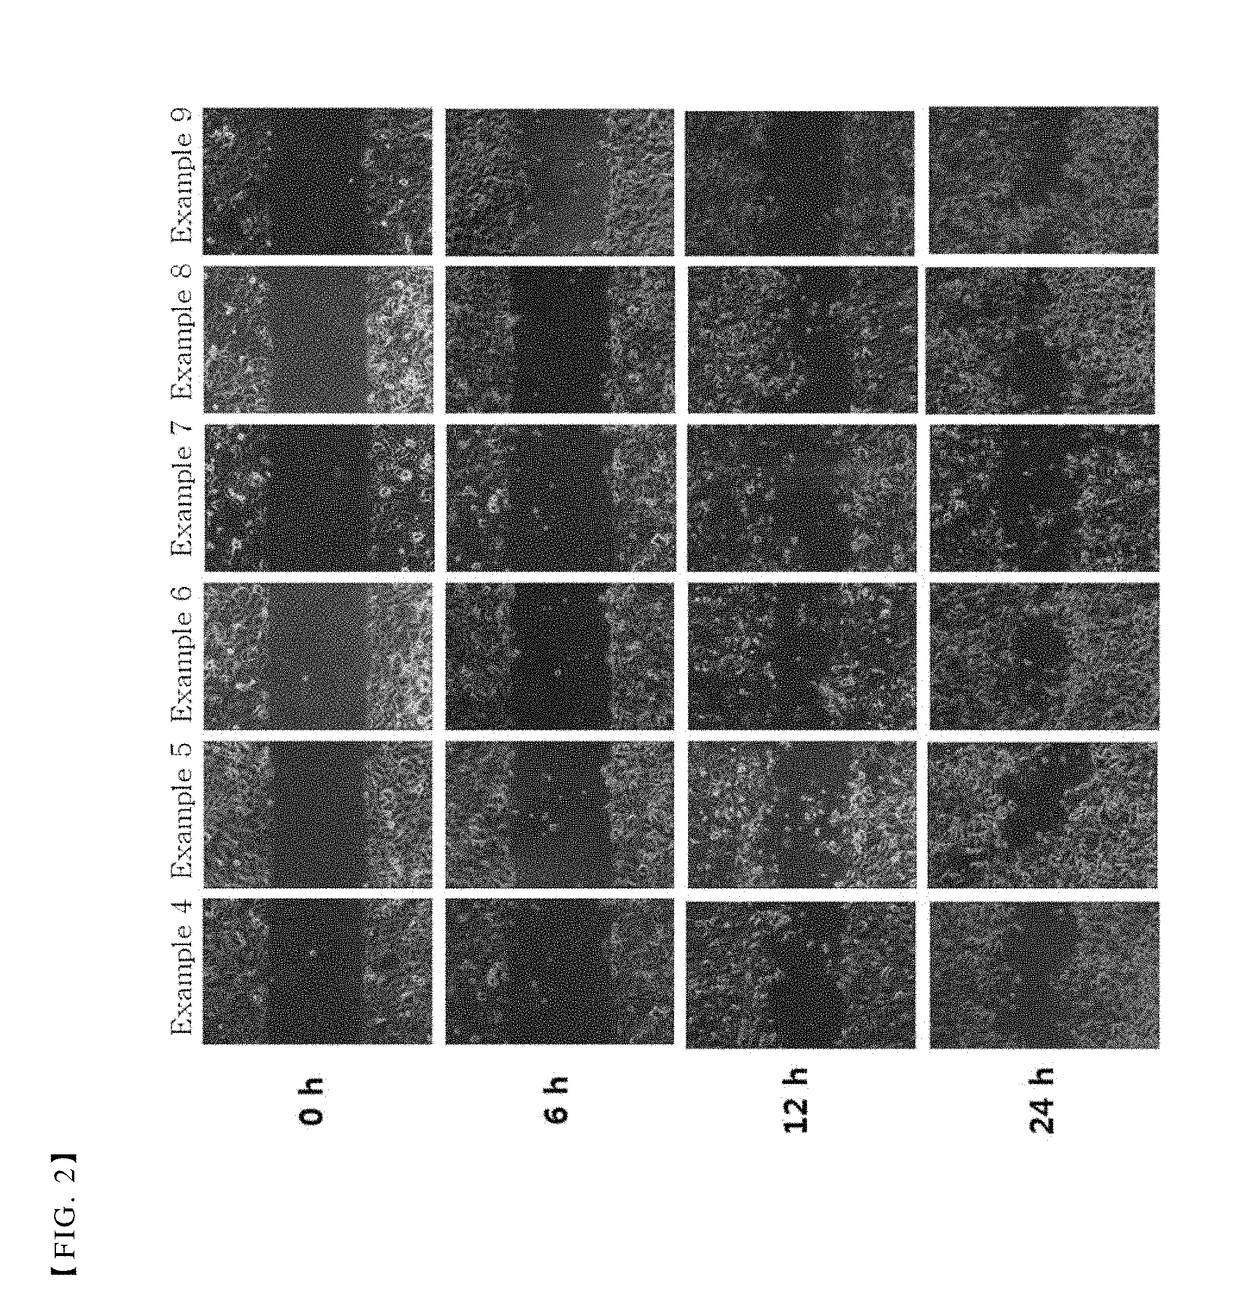 Pharmaceutical composition for treating or preventing corneal wound comprising thymosin β4 and citric acid